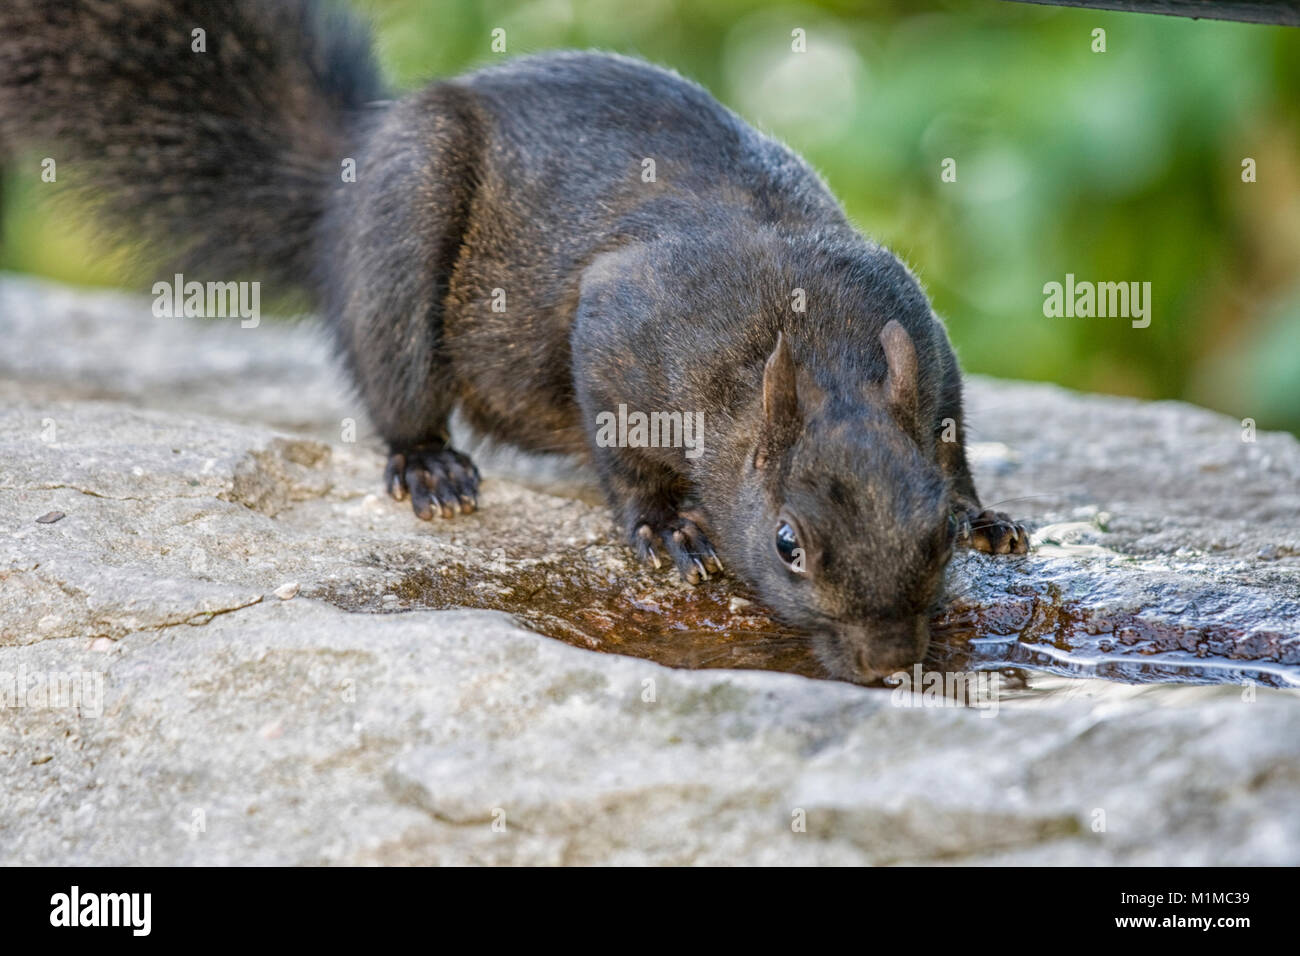 black squirrel drinking water from rock Stock Photo